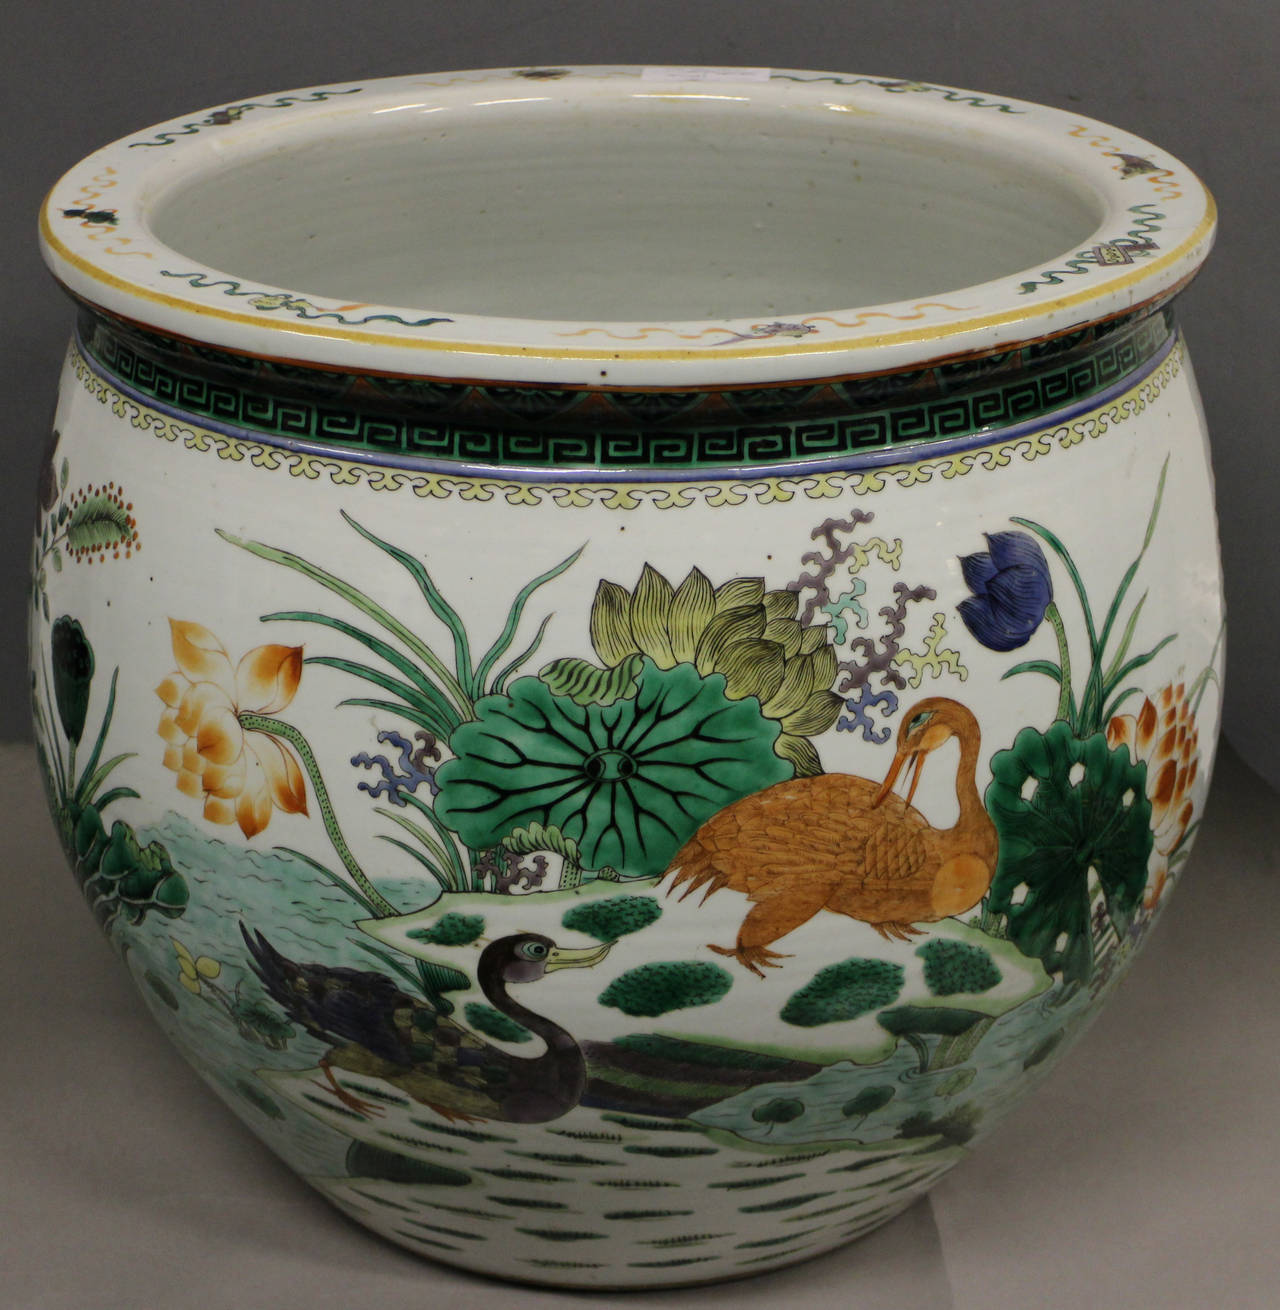 A Chinese famille verte jardinière decorated with a continuous scene of ducks in a lily pond.

(Buyers in the UK and Europe will be subject to +VAT)